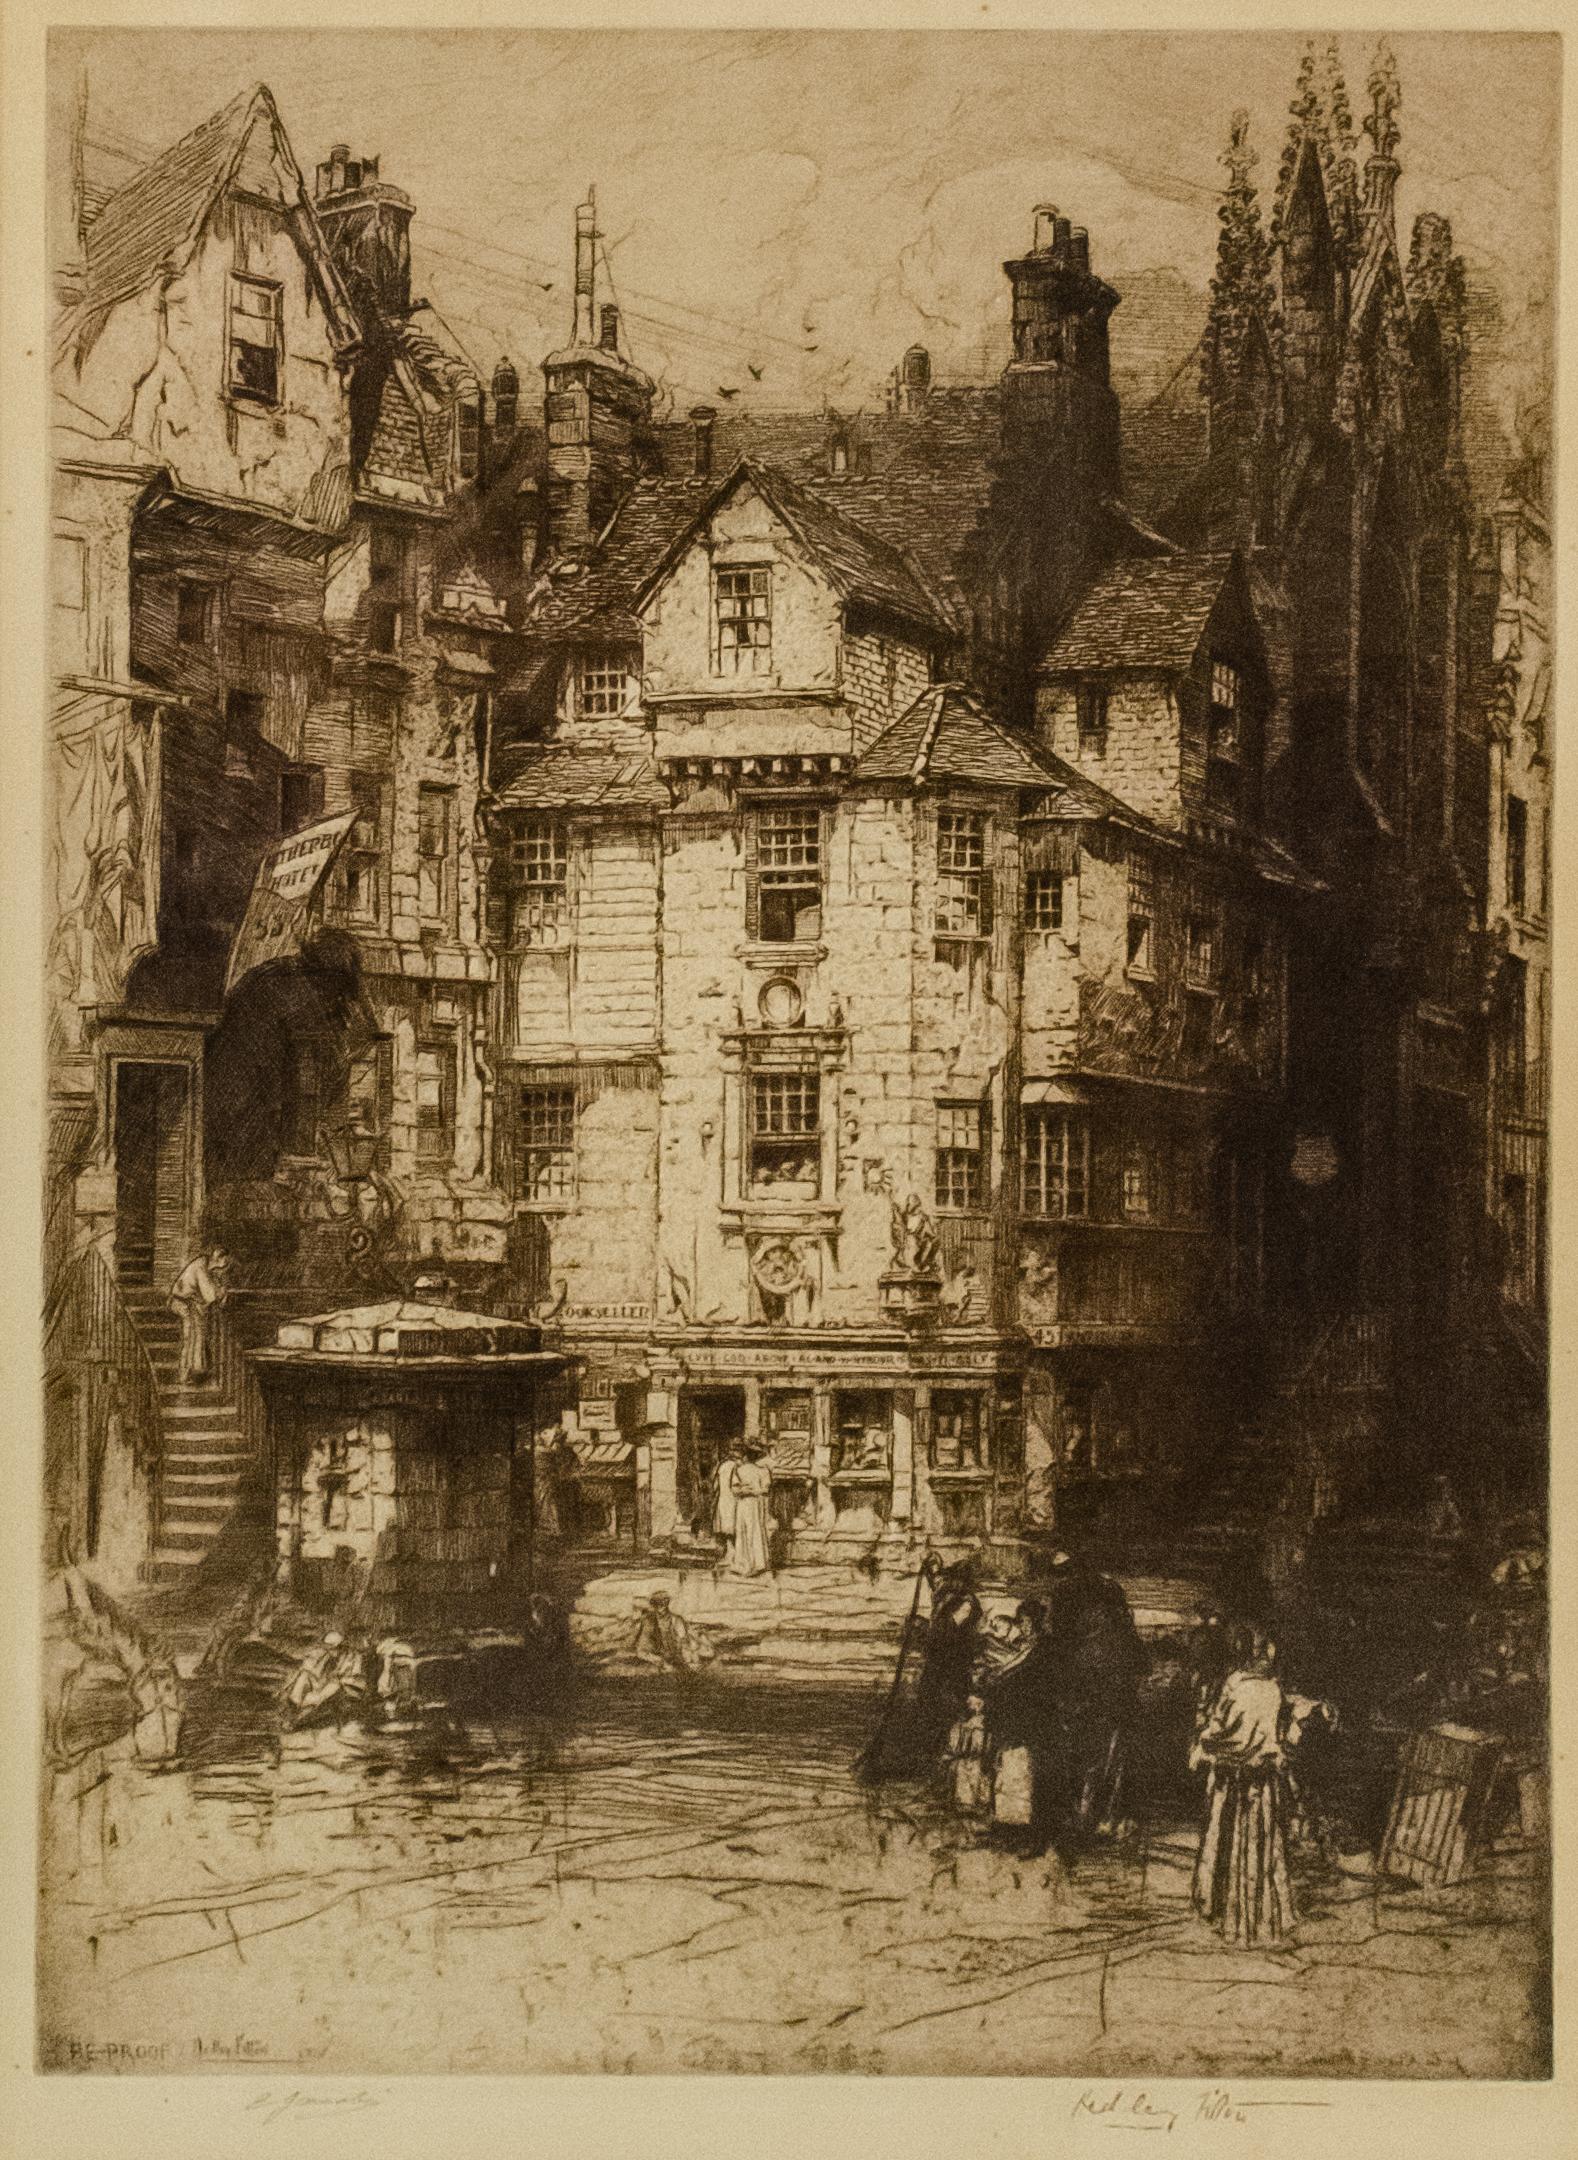 Hedley Fitton (British, c. 1857-1929)
John Knox's House, c. 1900
Etching
17 x 12 3/4 in.
Framed: 25 x 20 1/2 in.
Signed in the plate by Hedley Fitton
Signed in pencil lower left: E. Jacoby

Hedley Fitton was born in 1859 in Manchester, England and